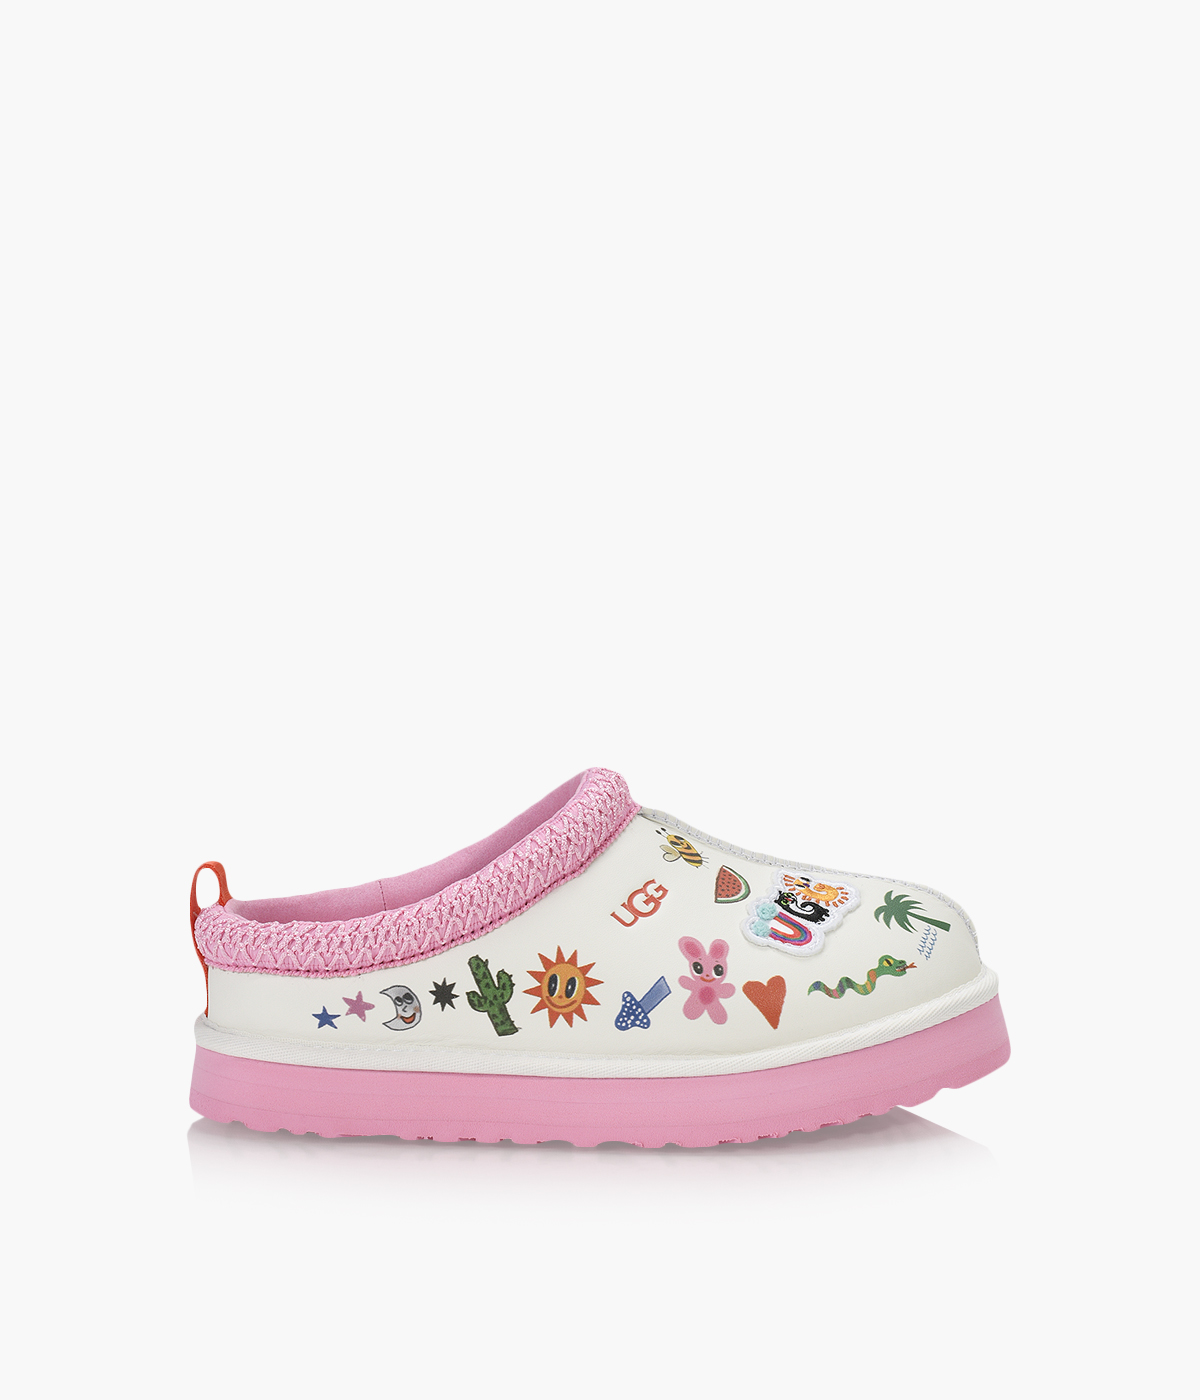 UGG TAZZ POP SKETCH - Multicolour | Browns Shoes